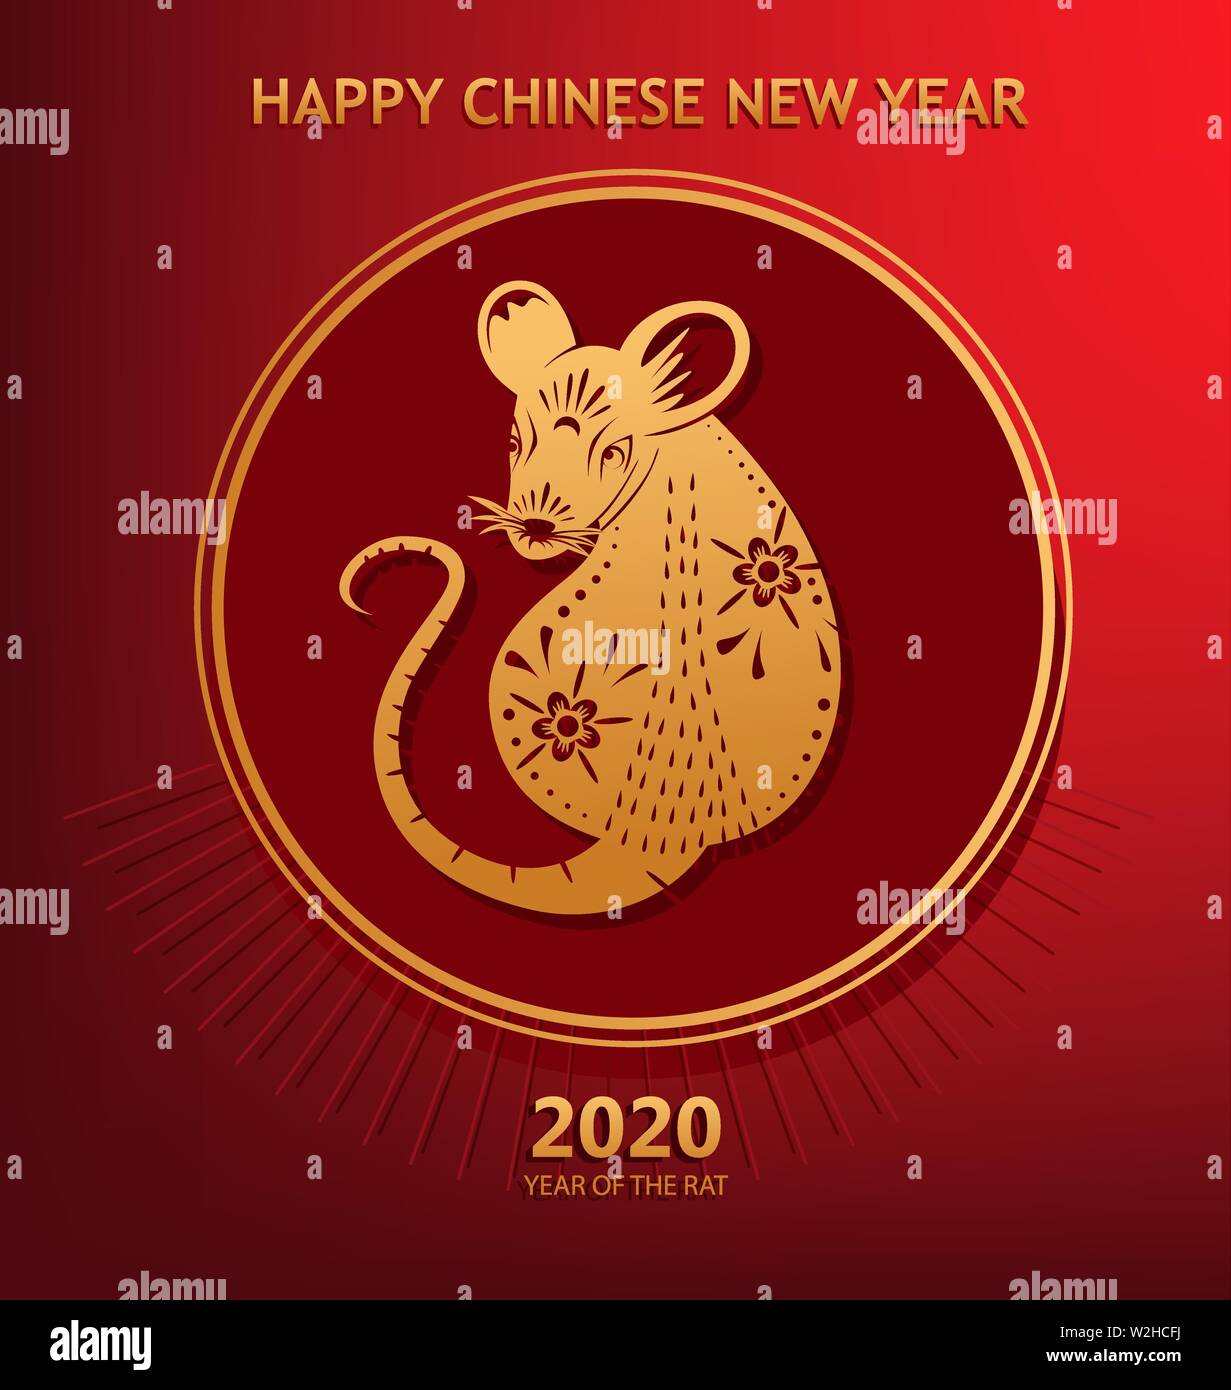 Chinese New Year ~ The Year of the Rat 2020 ~ Greetings Cards~